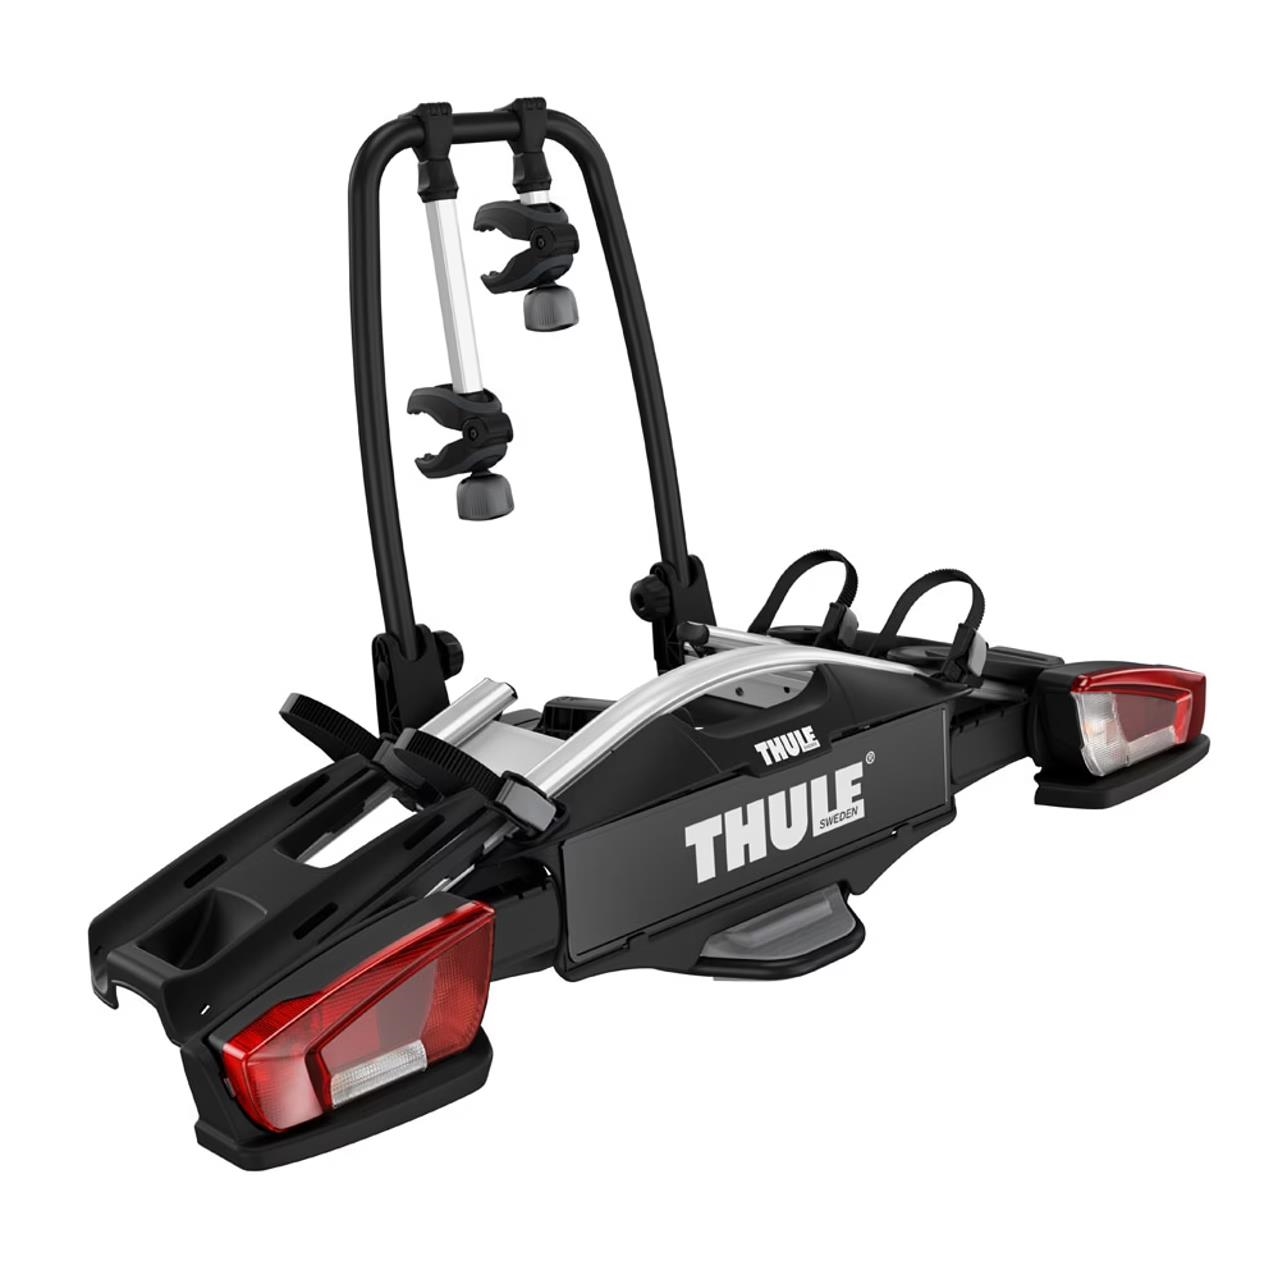 Suport 2 biciclete Thule VeloCompact 924001